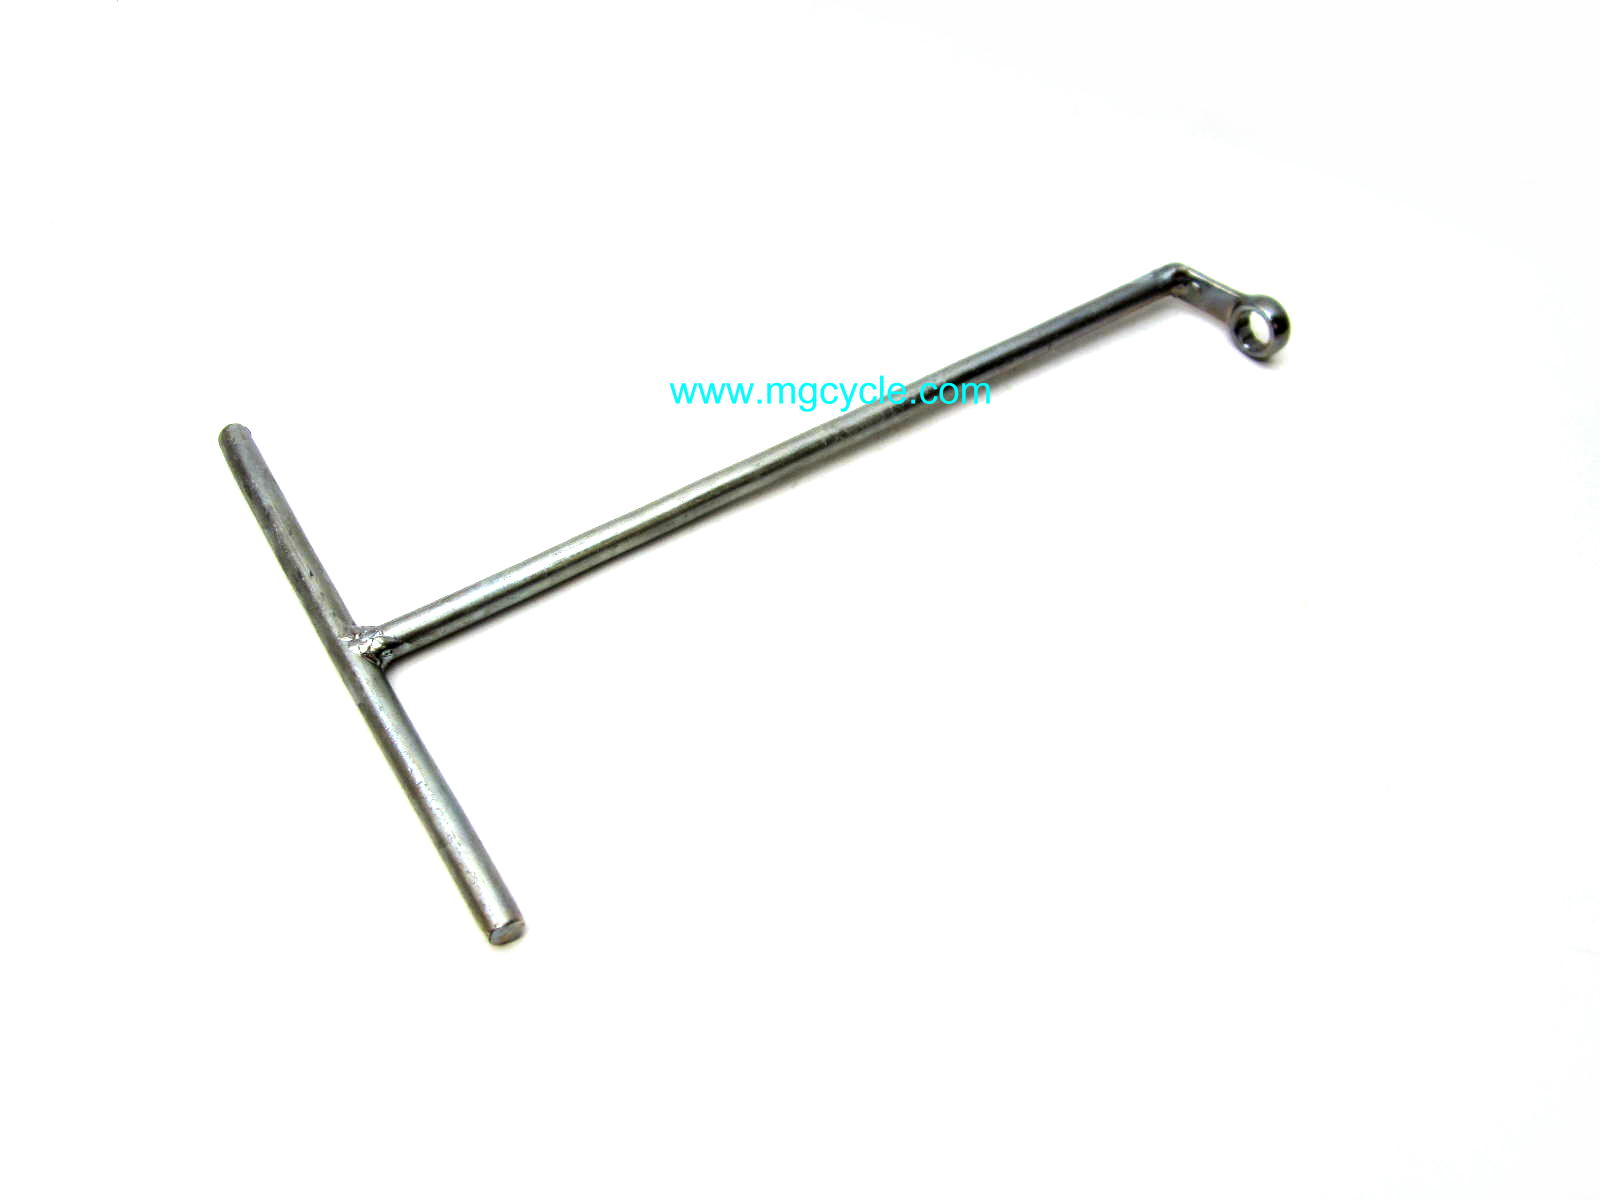 Distributor wrench, 13mm